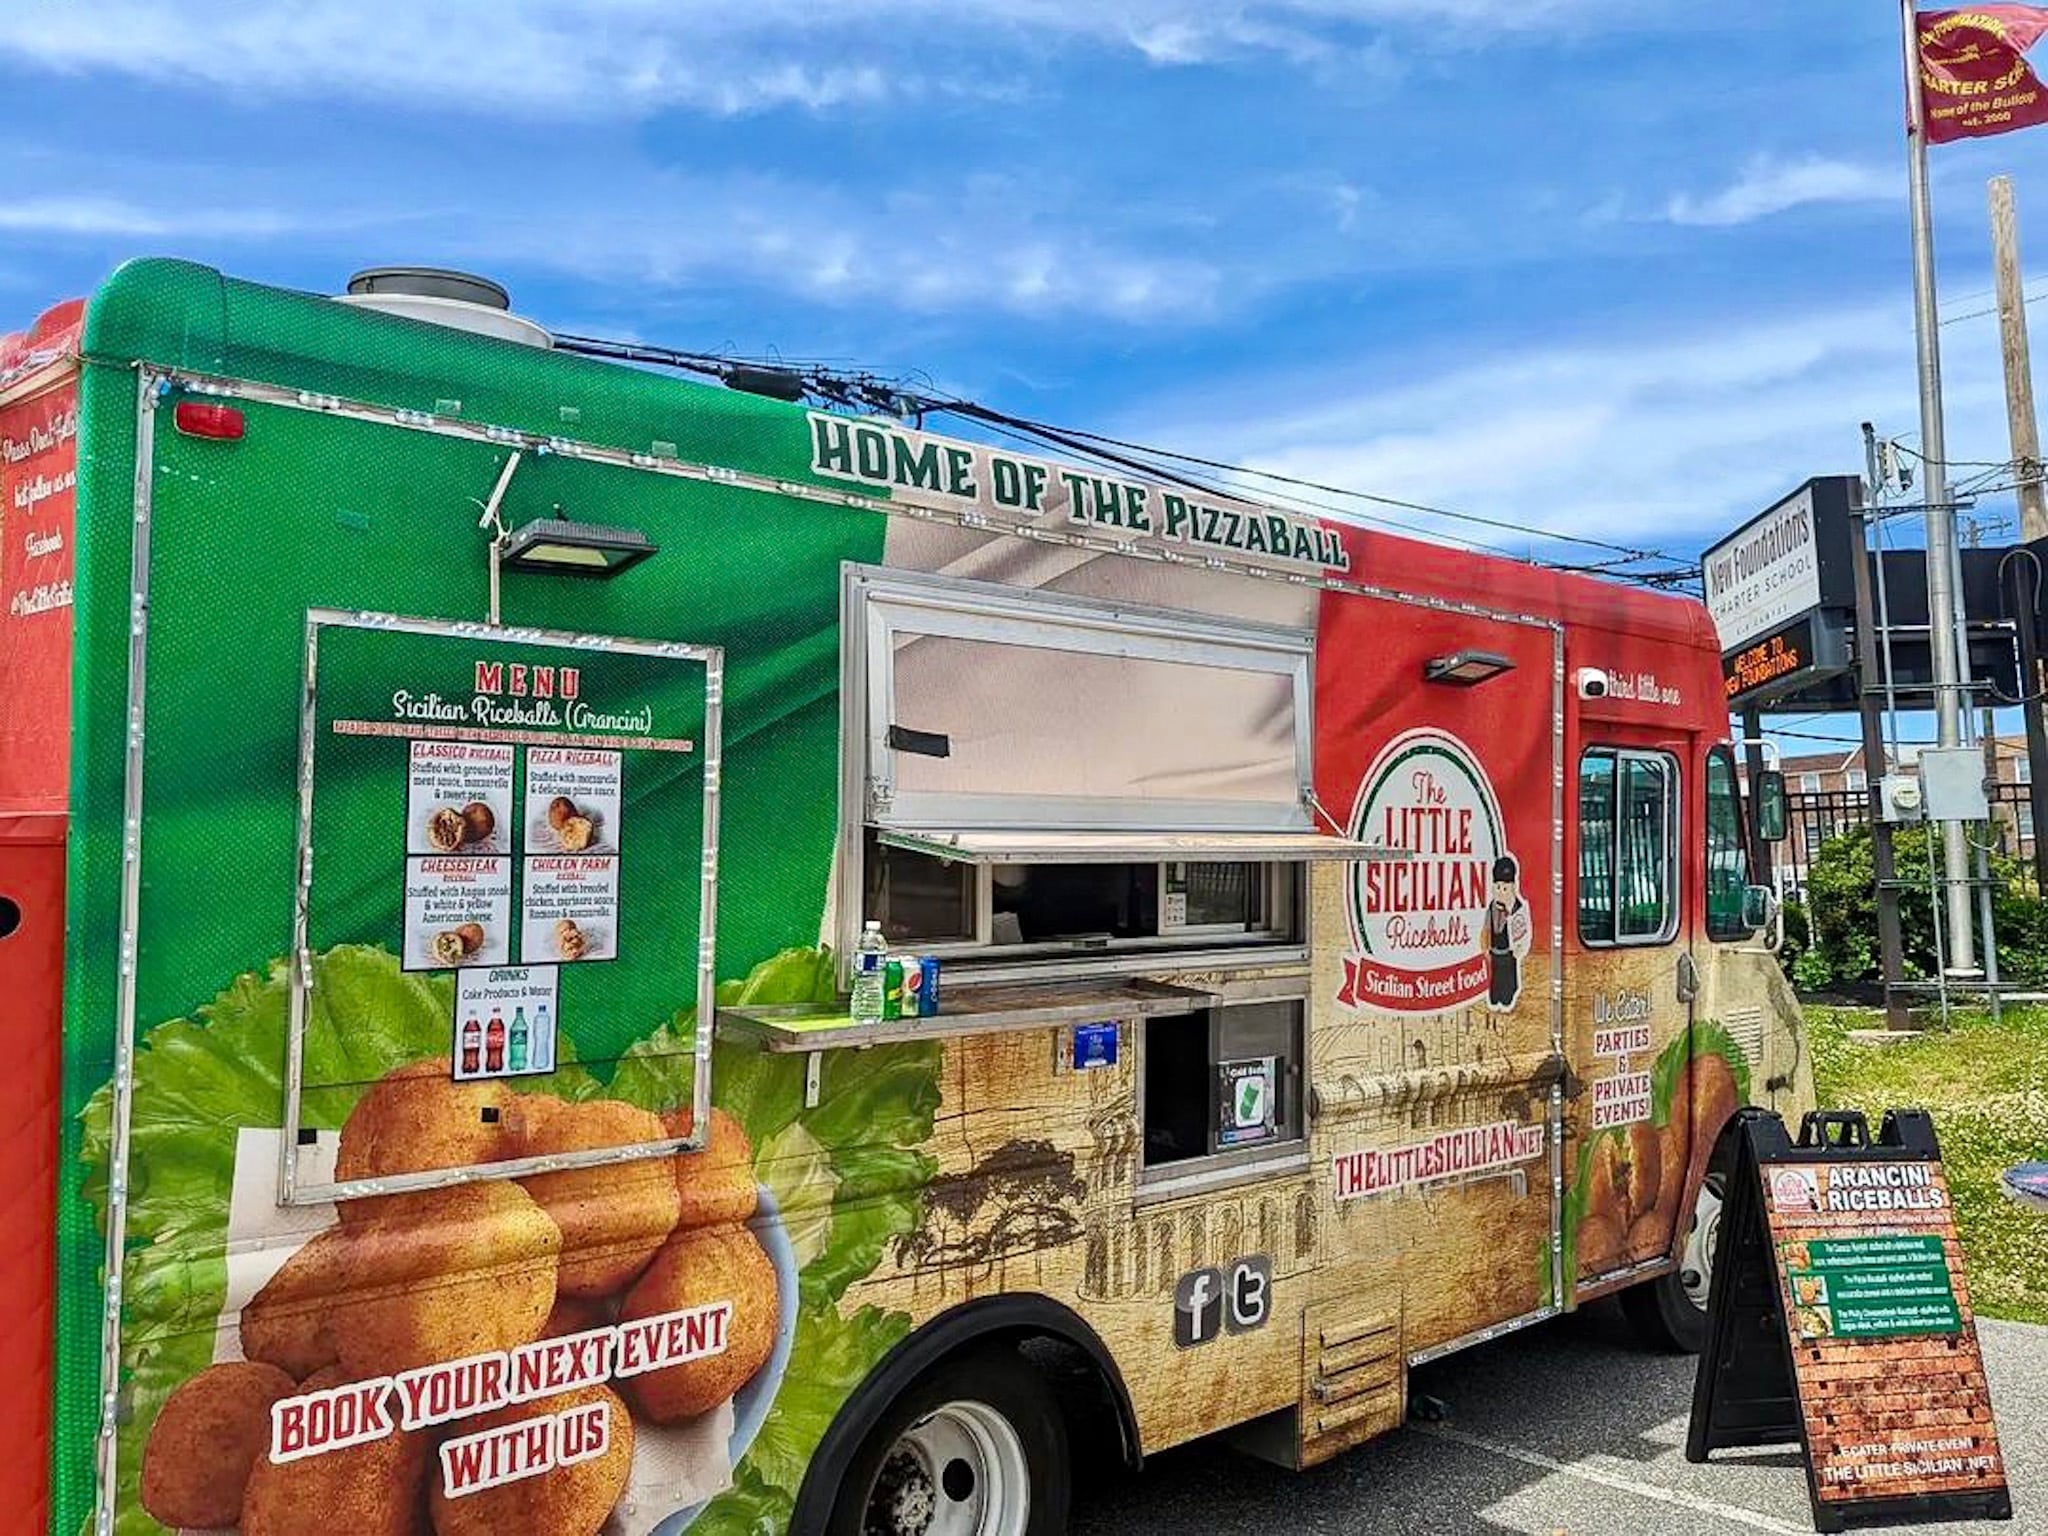 the little sicilian food truck at a food truck event